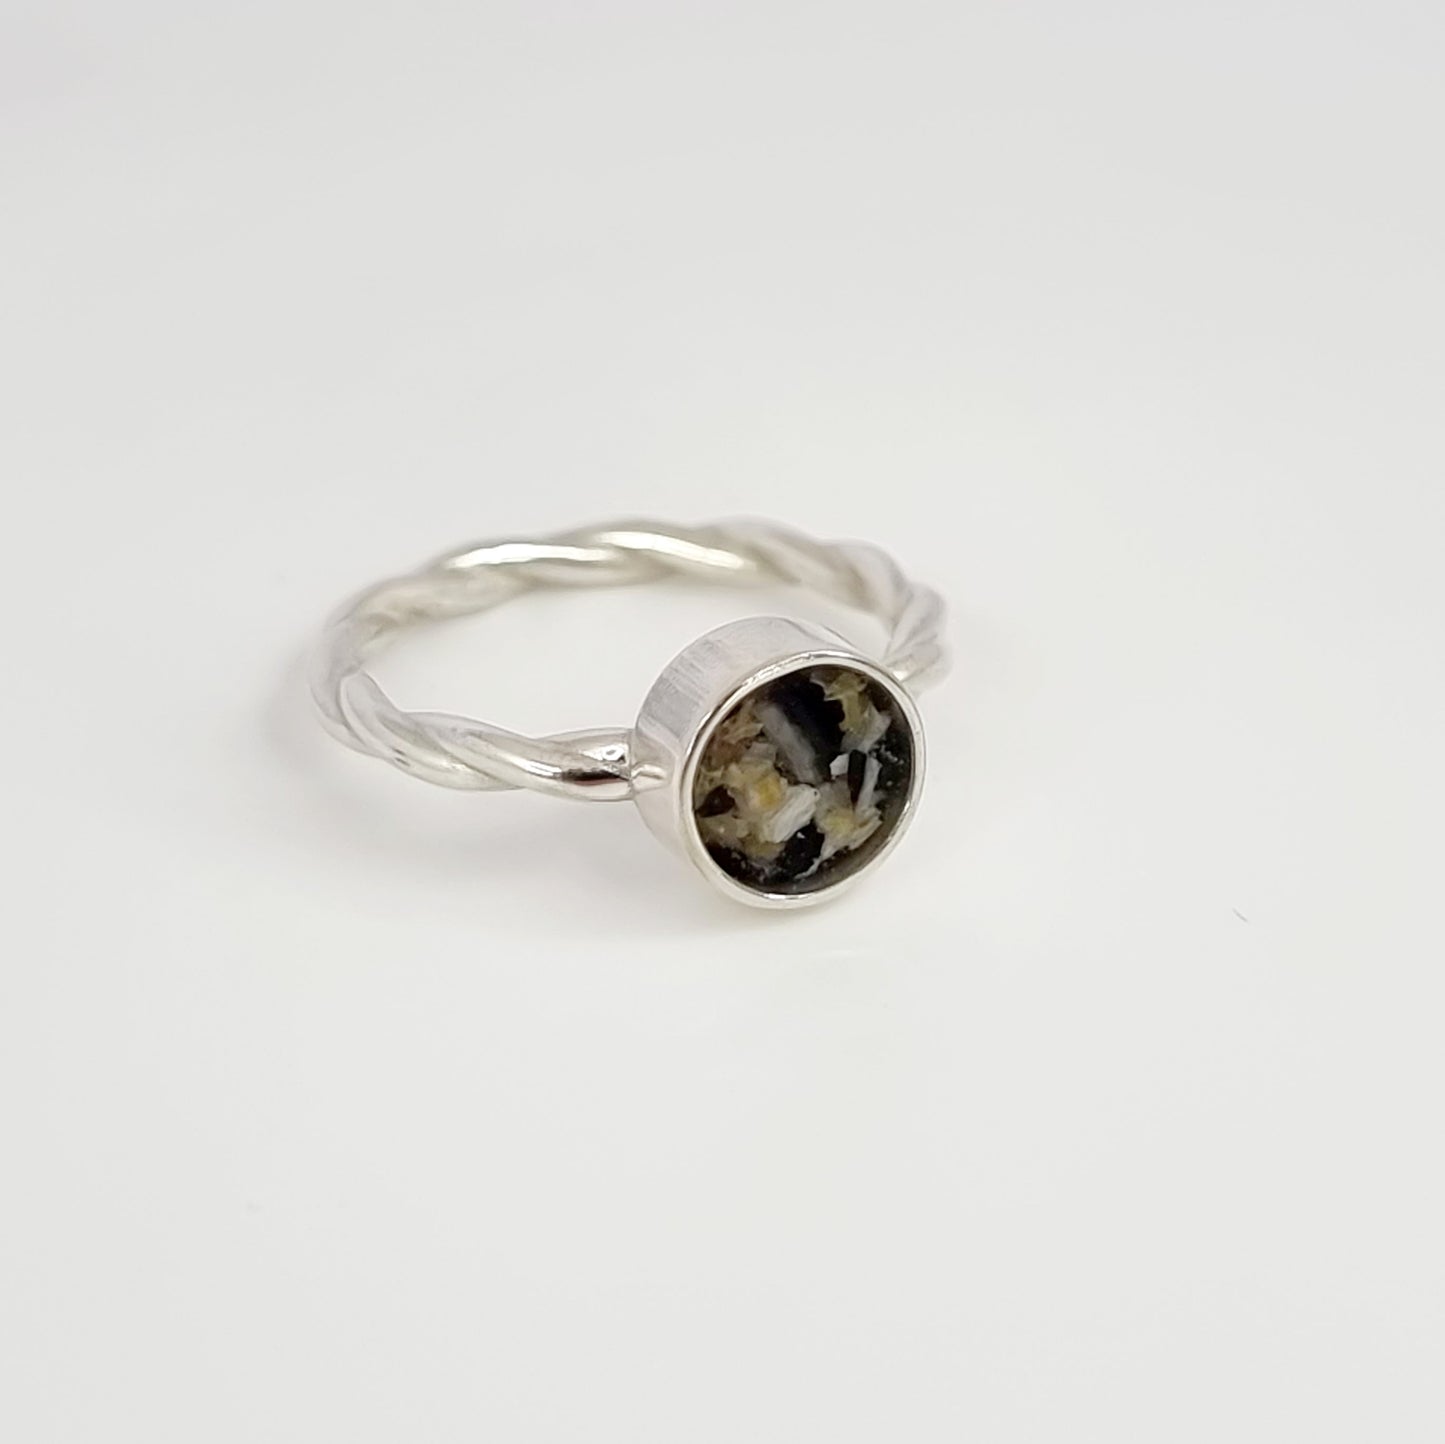 Wreathe of Remembrance - Ring